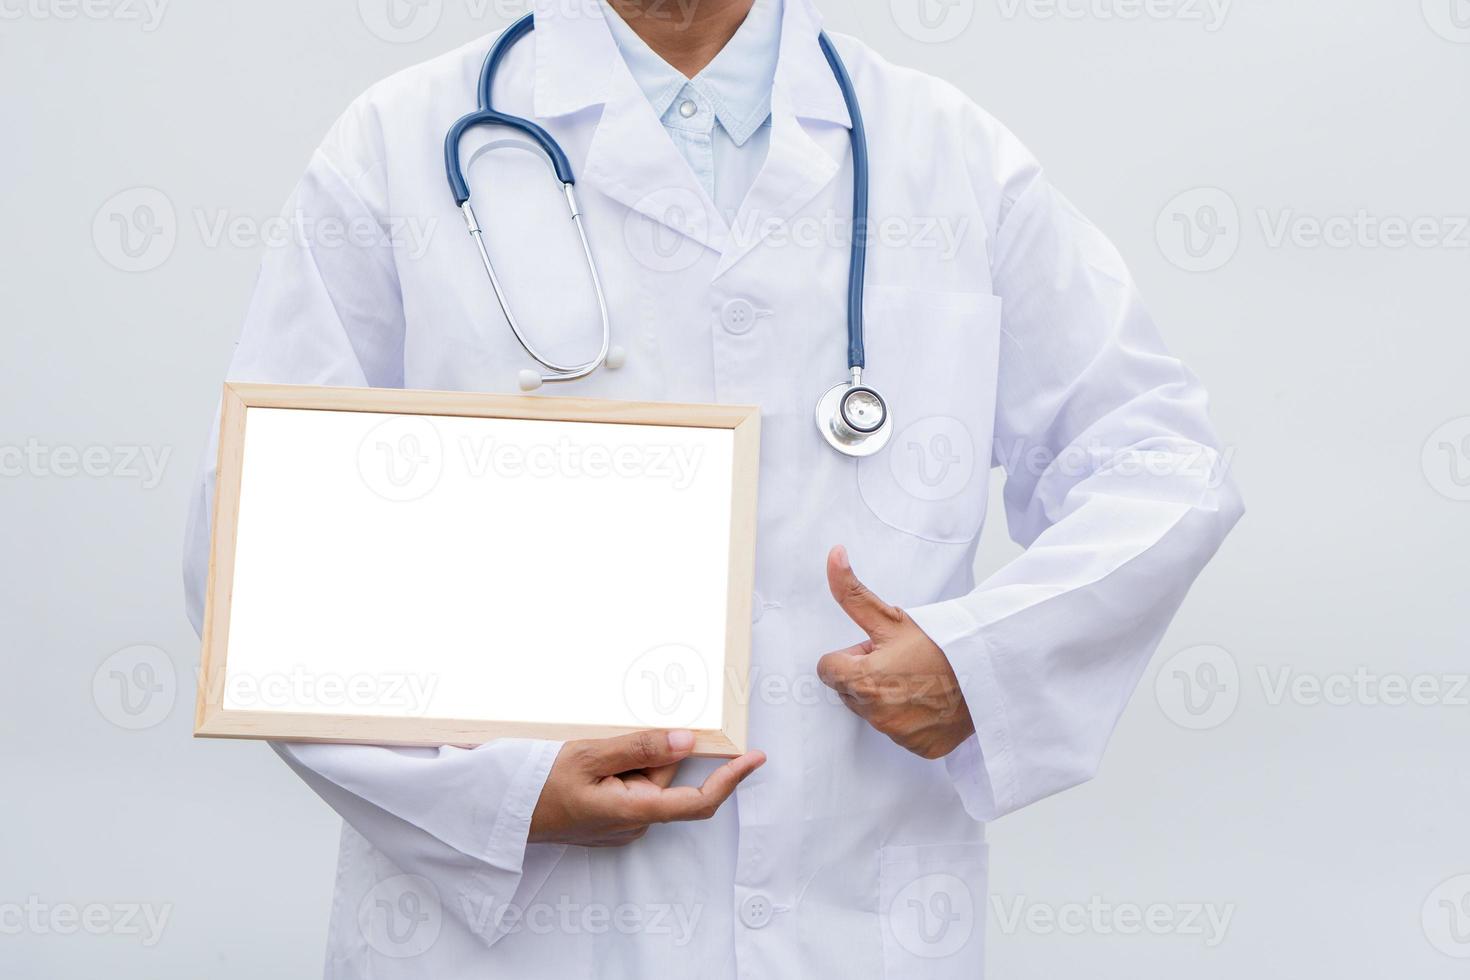 profession doctor in white coat over white isolated background with white blank board and Thumbs up. Concept of healthcare, science and medicine concept photo